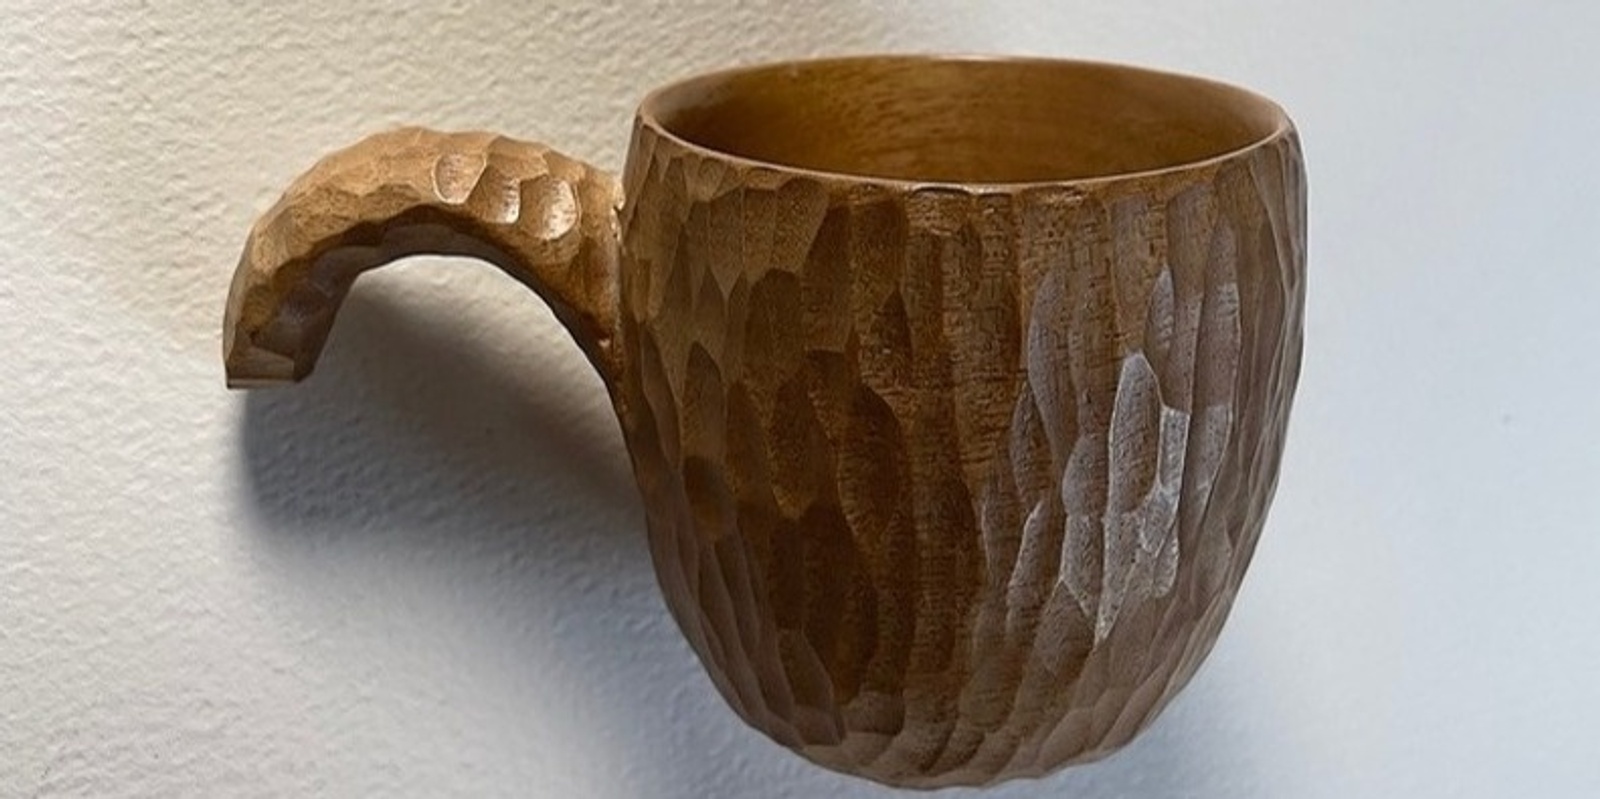 MORE THAN A CUP | 3 Day Wood Workshop with Master Carvers Hape Kiddle & Carol Russel